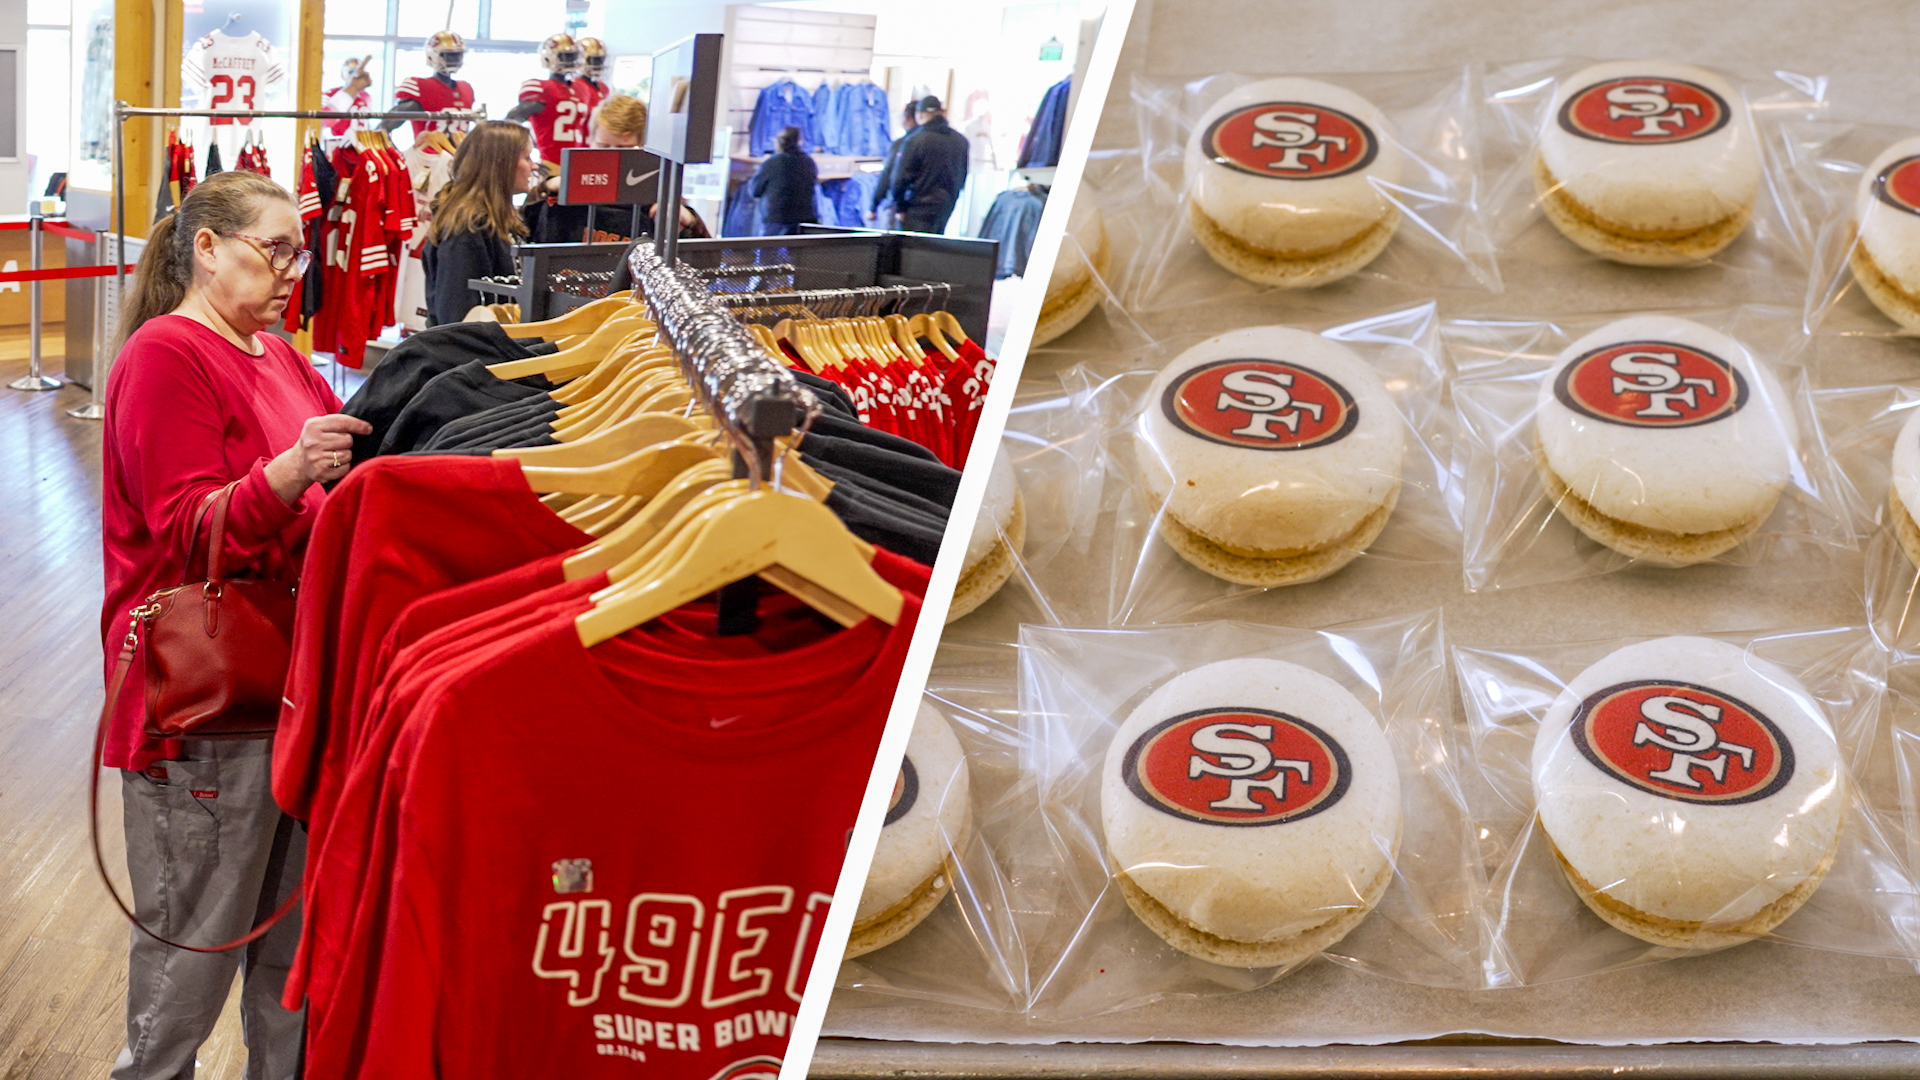 49ers fan merchandise you can wear on Super Bowl Sunday - ABC7 Chicago